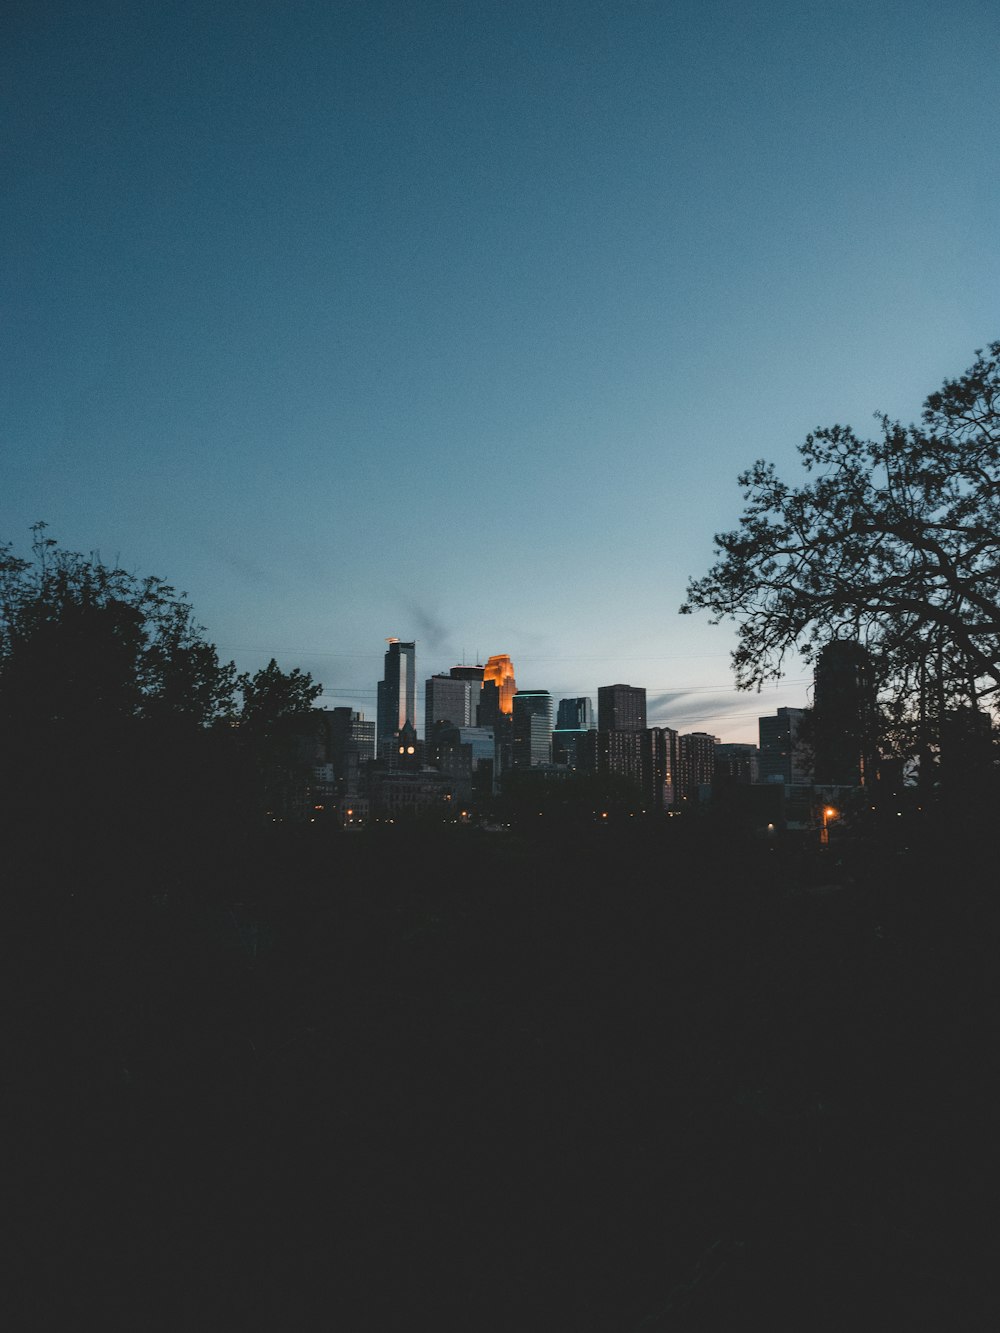 silhouette of trees and buildings during night time